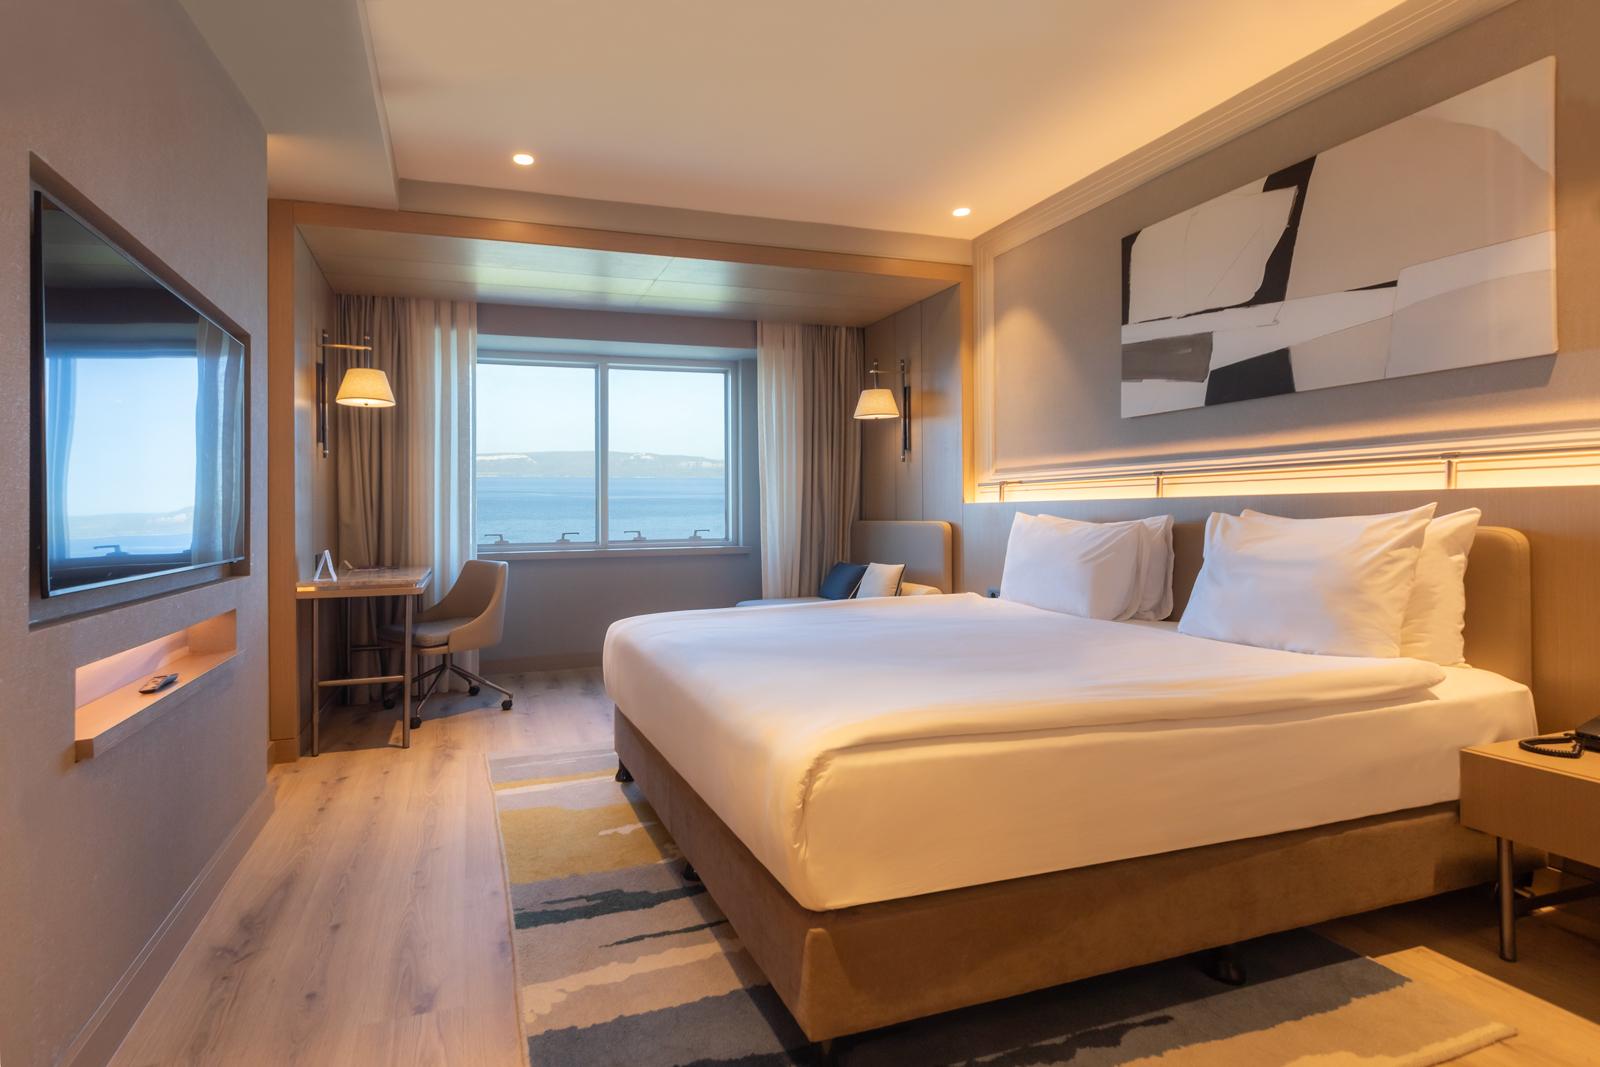 DELUXE KING ROOM WITH BOSPHORUS VIEW